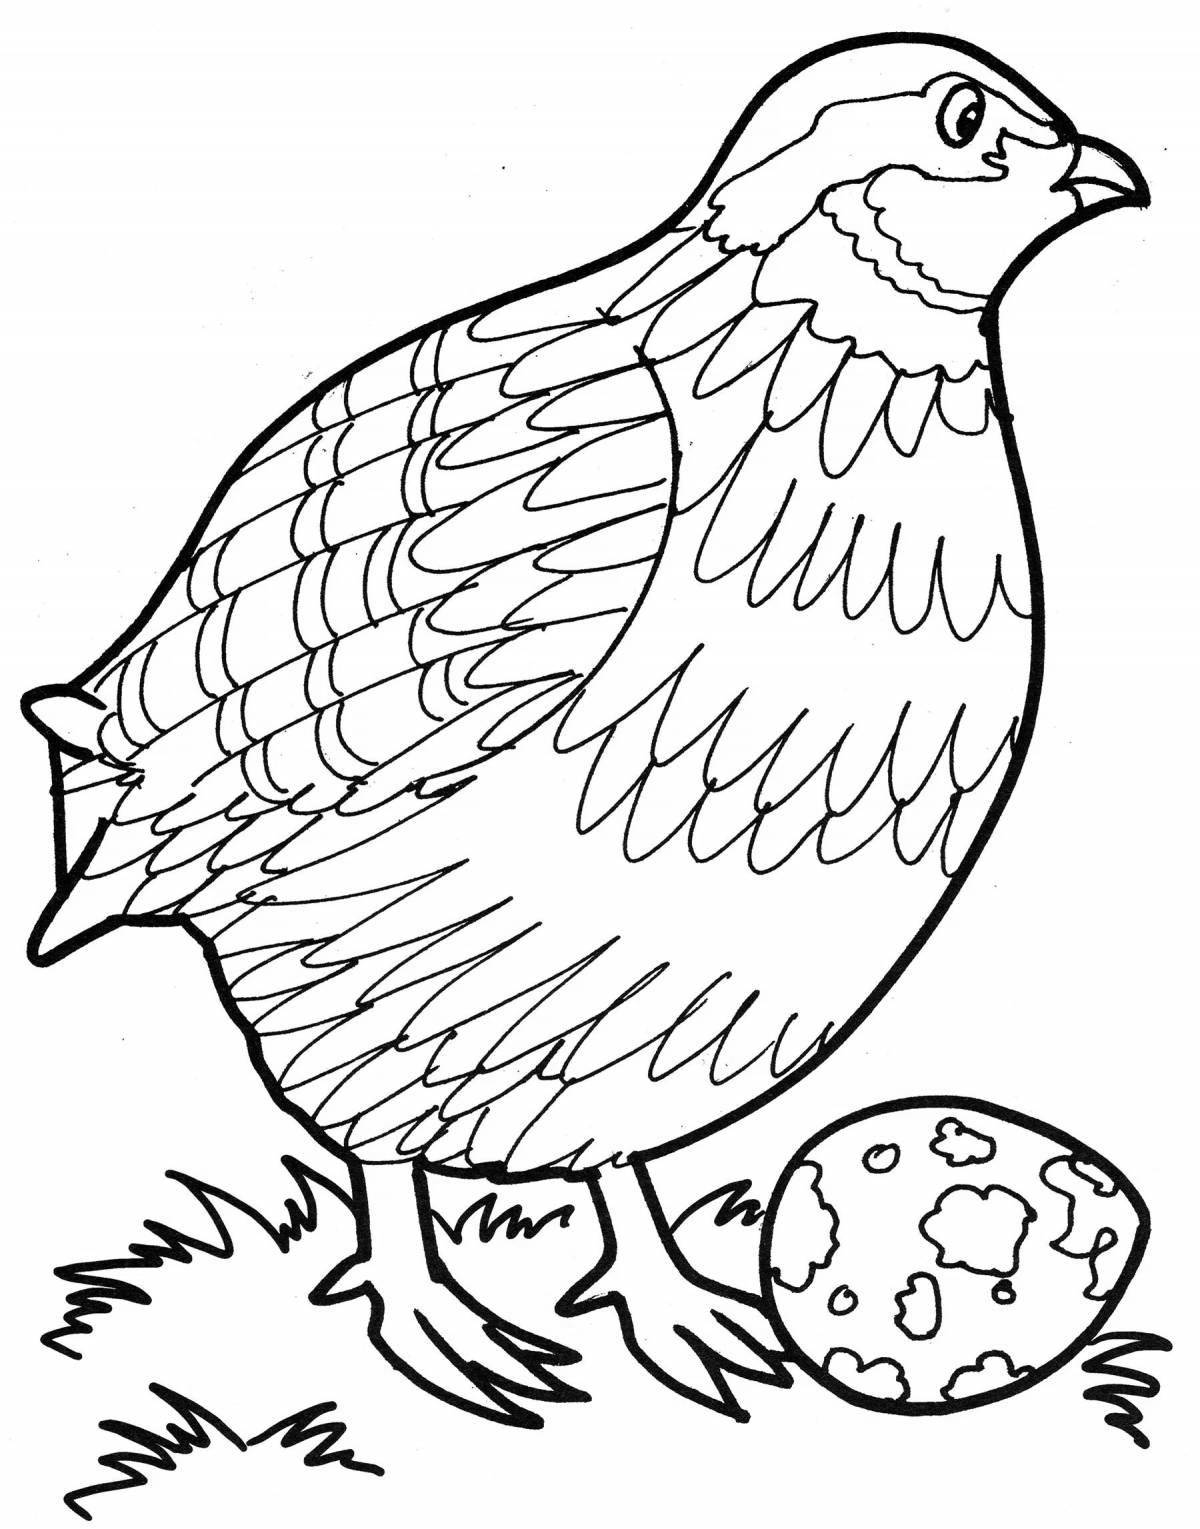 Coloring book glowing quail